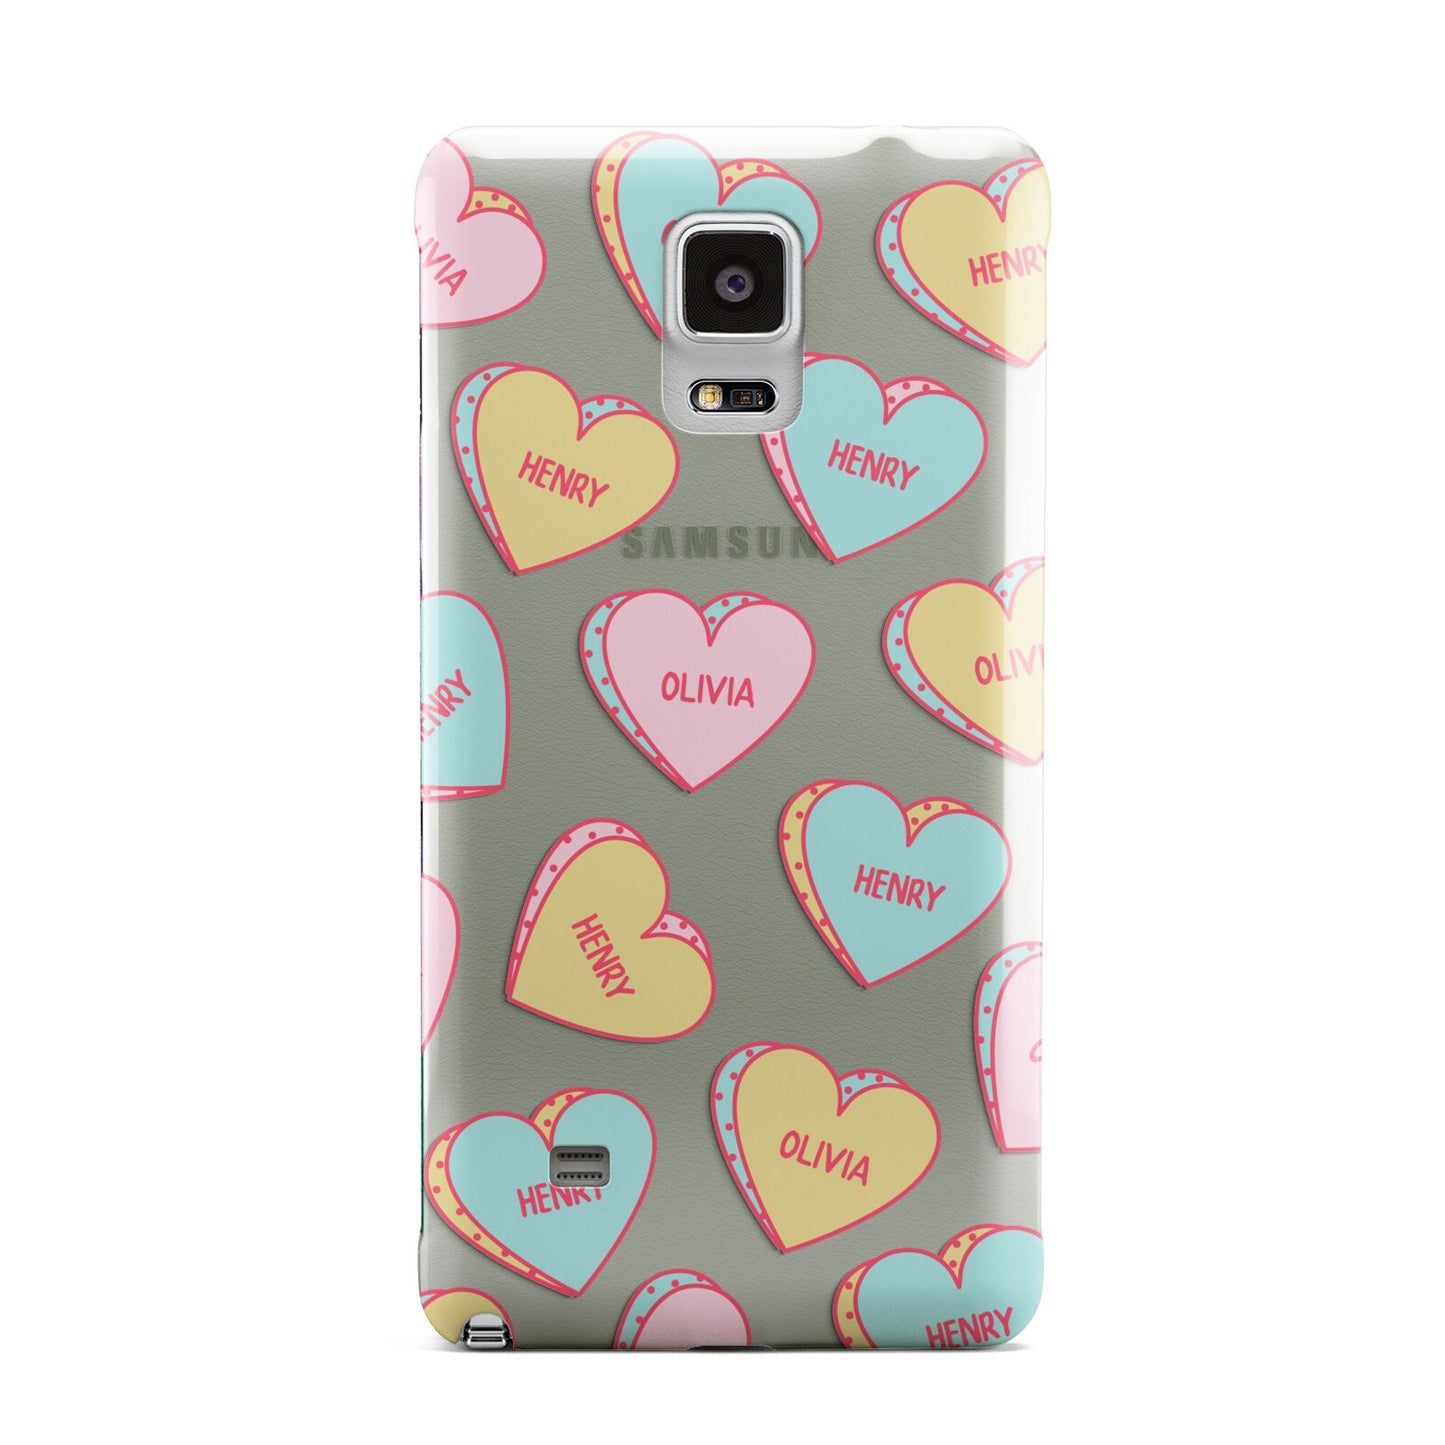 Personalised Heart Sweets Samsung Galaxy Note 4 Case